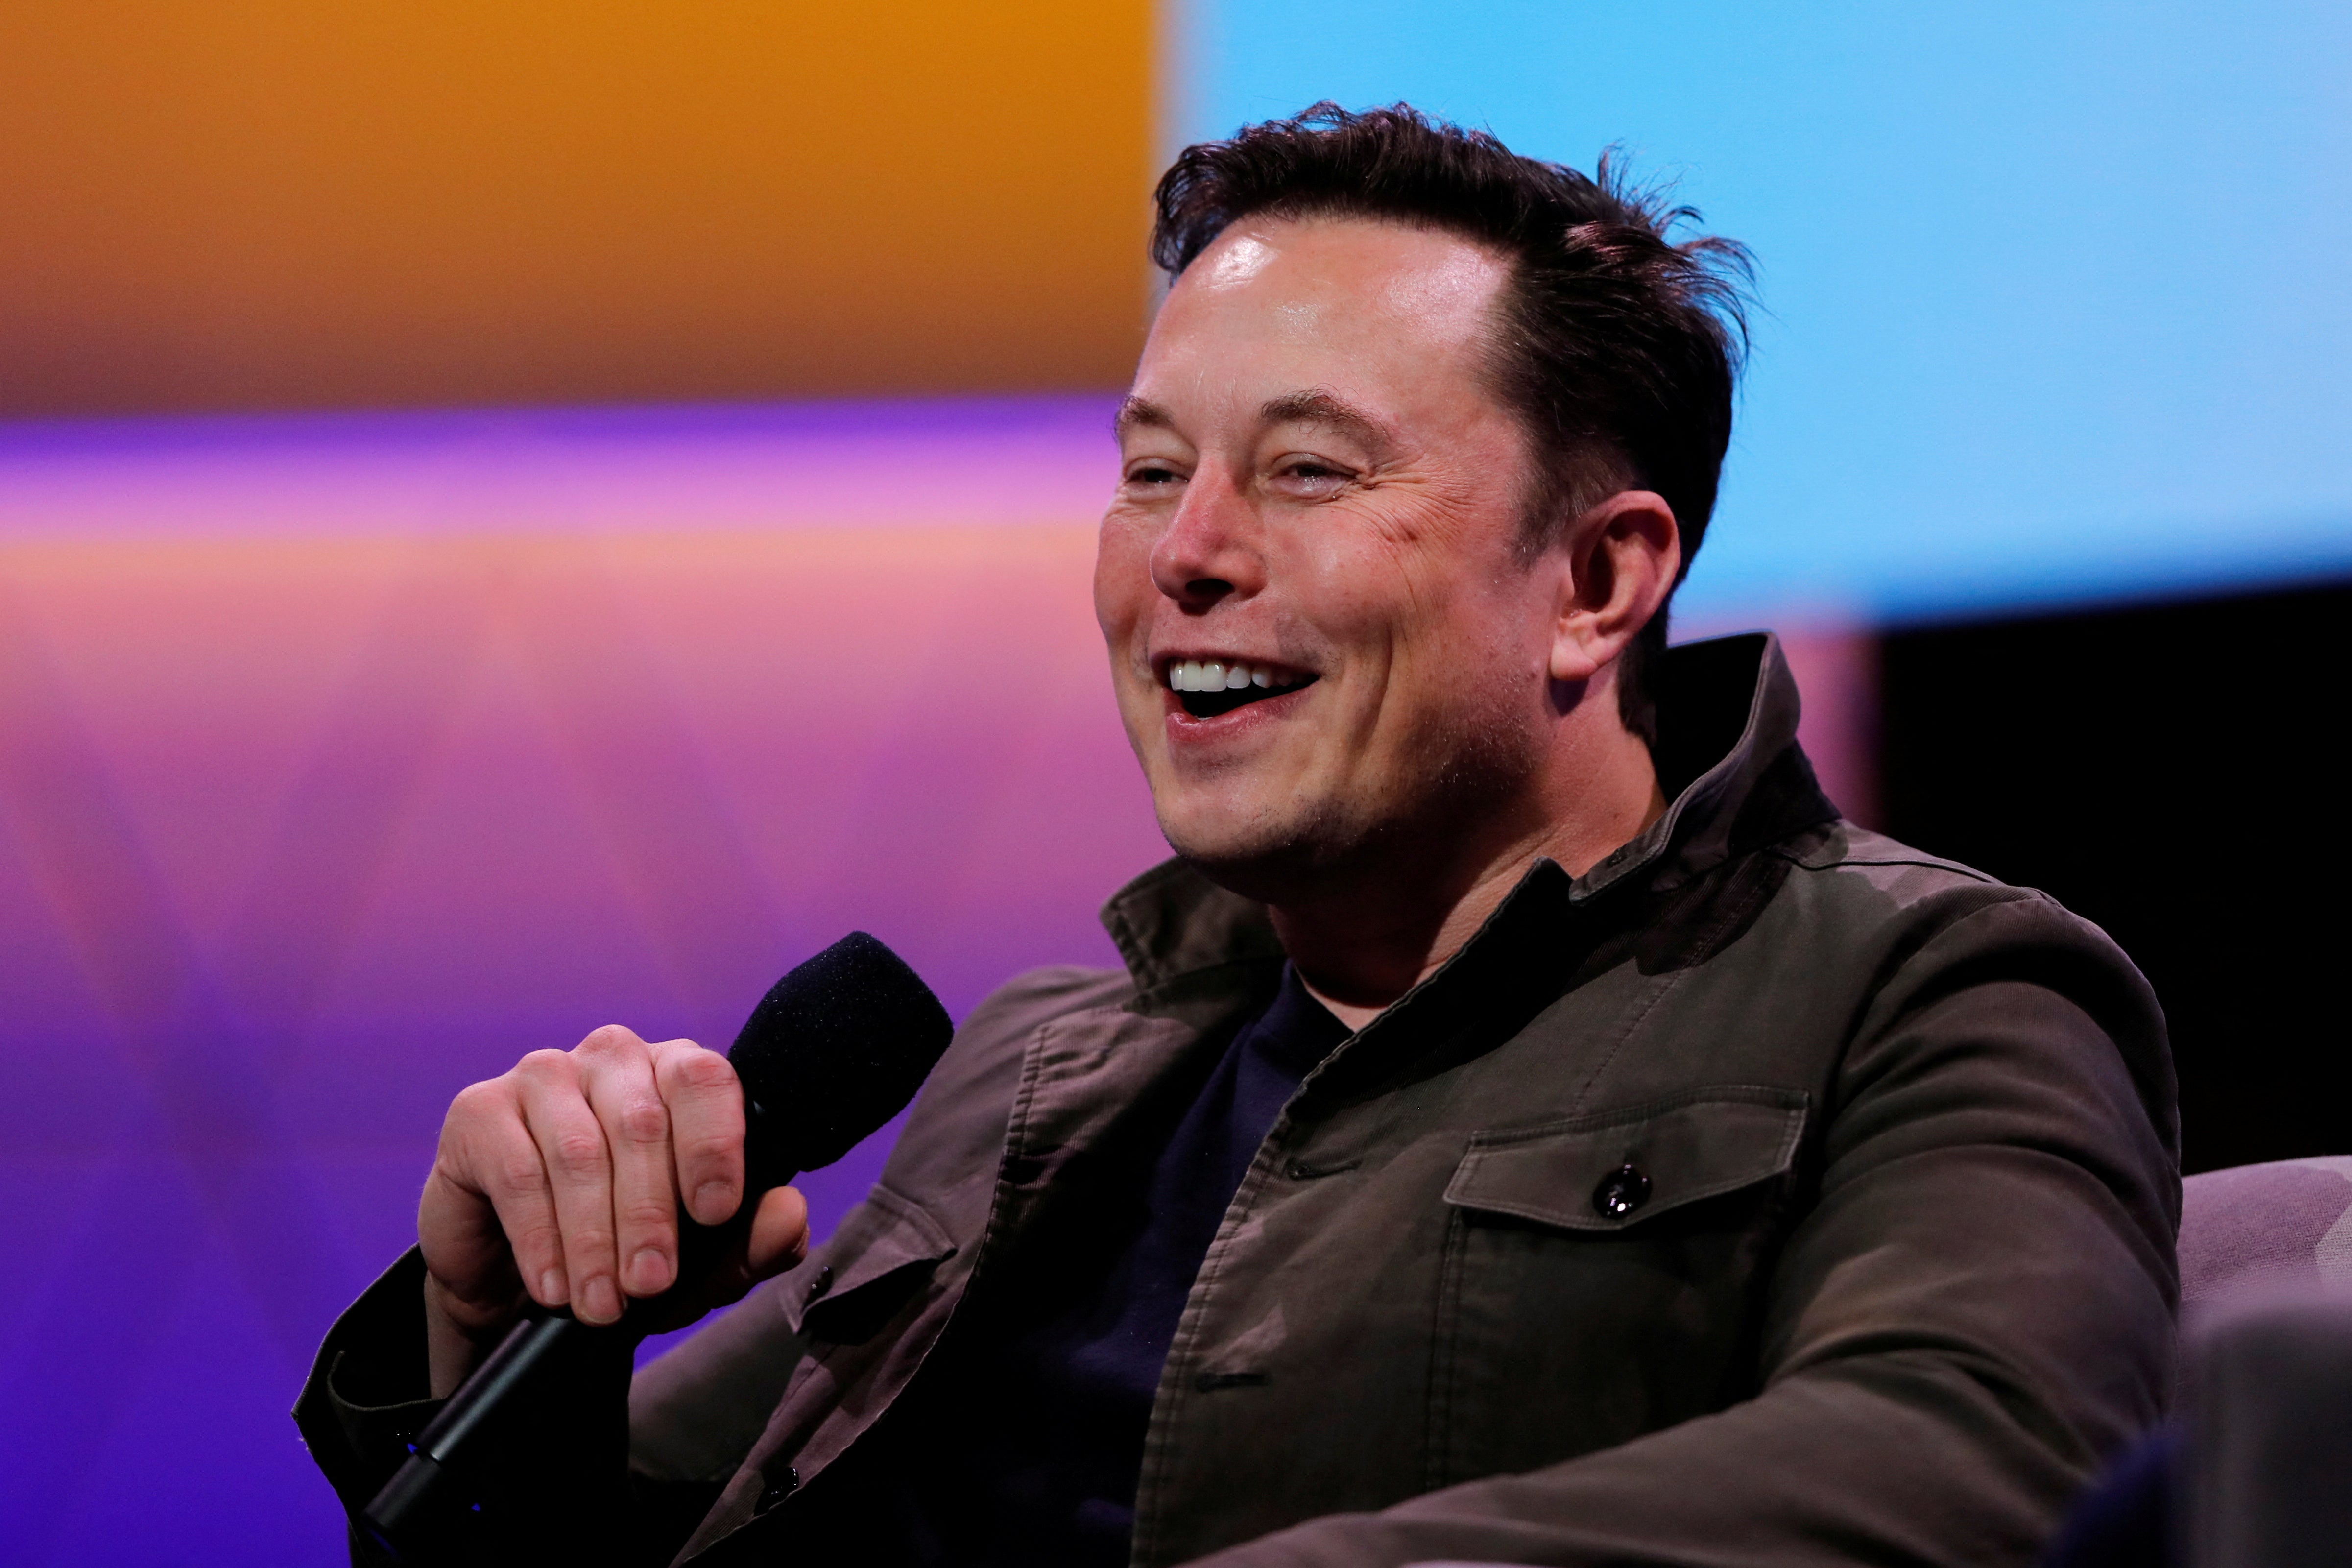 Elon Musk laughs while holding a microphone.